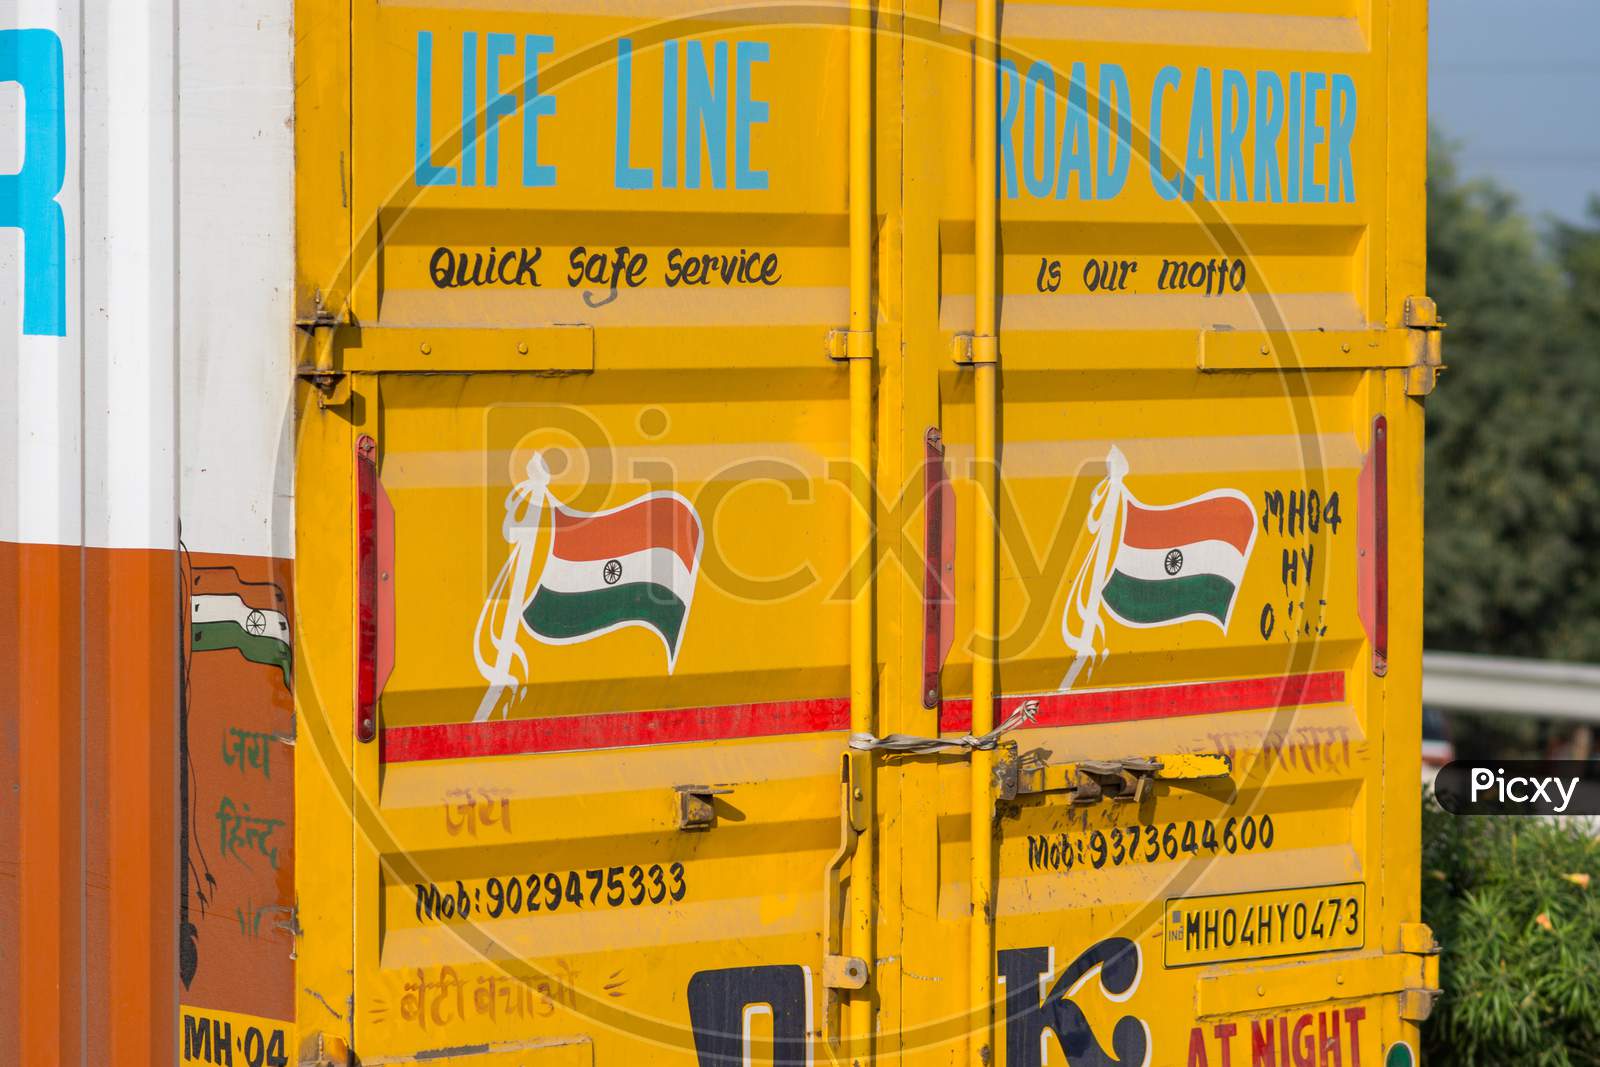 Colorfully Decorated Indian Truck On A Delhi–Jaipur Expressway Nh48 Near Jaipur, India